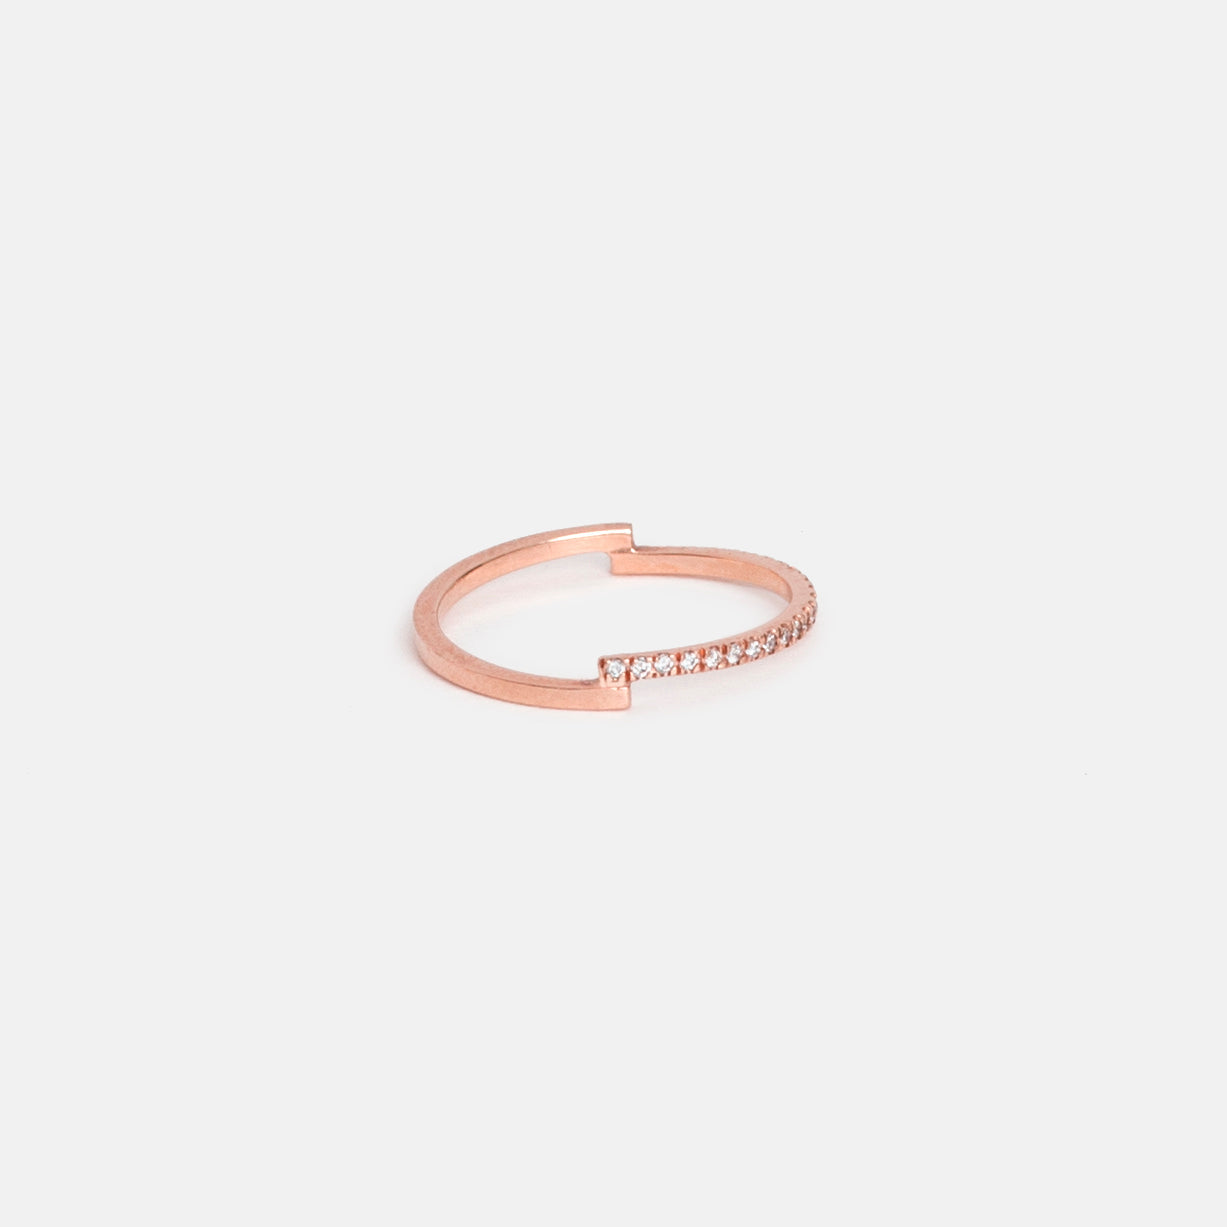 Para Unconventional Ring in 14k Rose Gold set with White Diamonds By SHW Fine Jewelry NYC